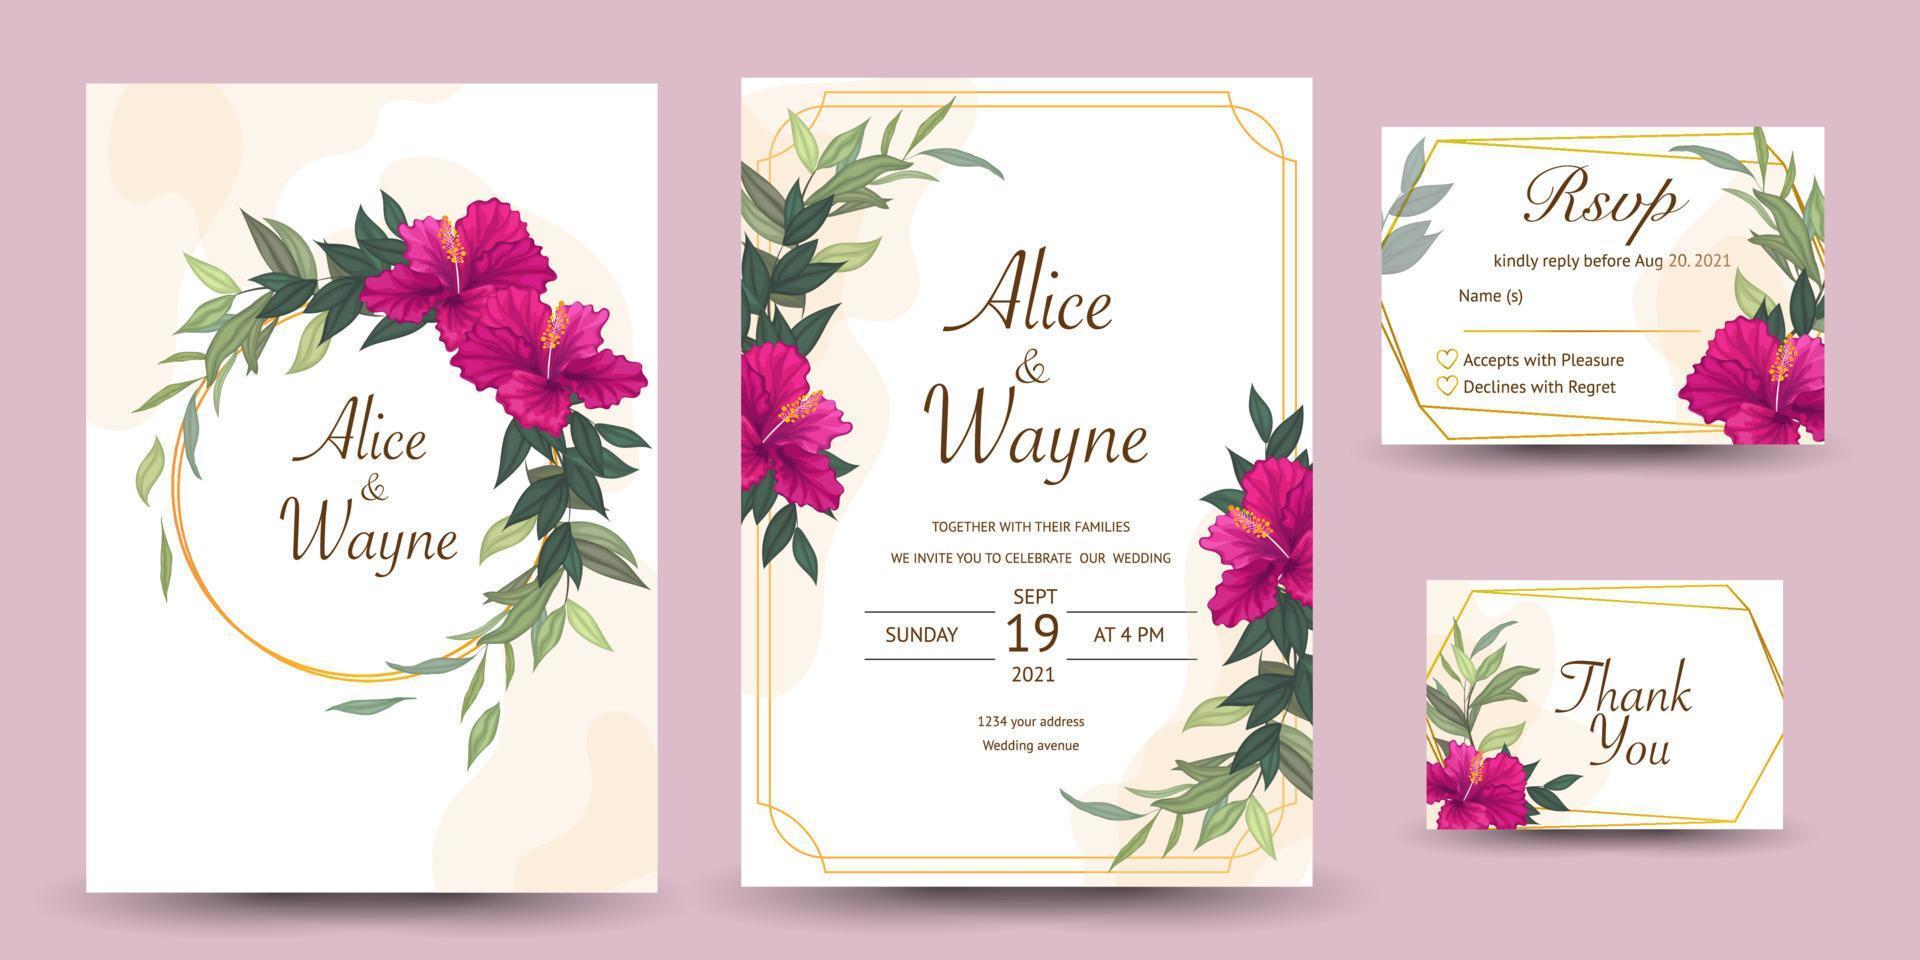 wedding invitation with floral design background. vector